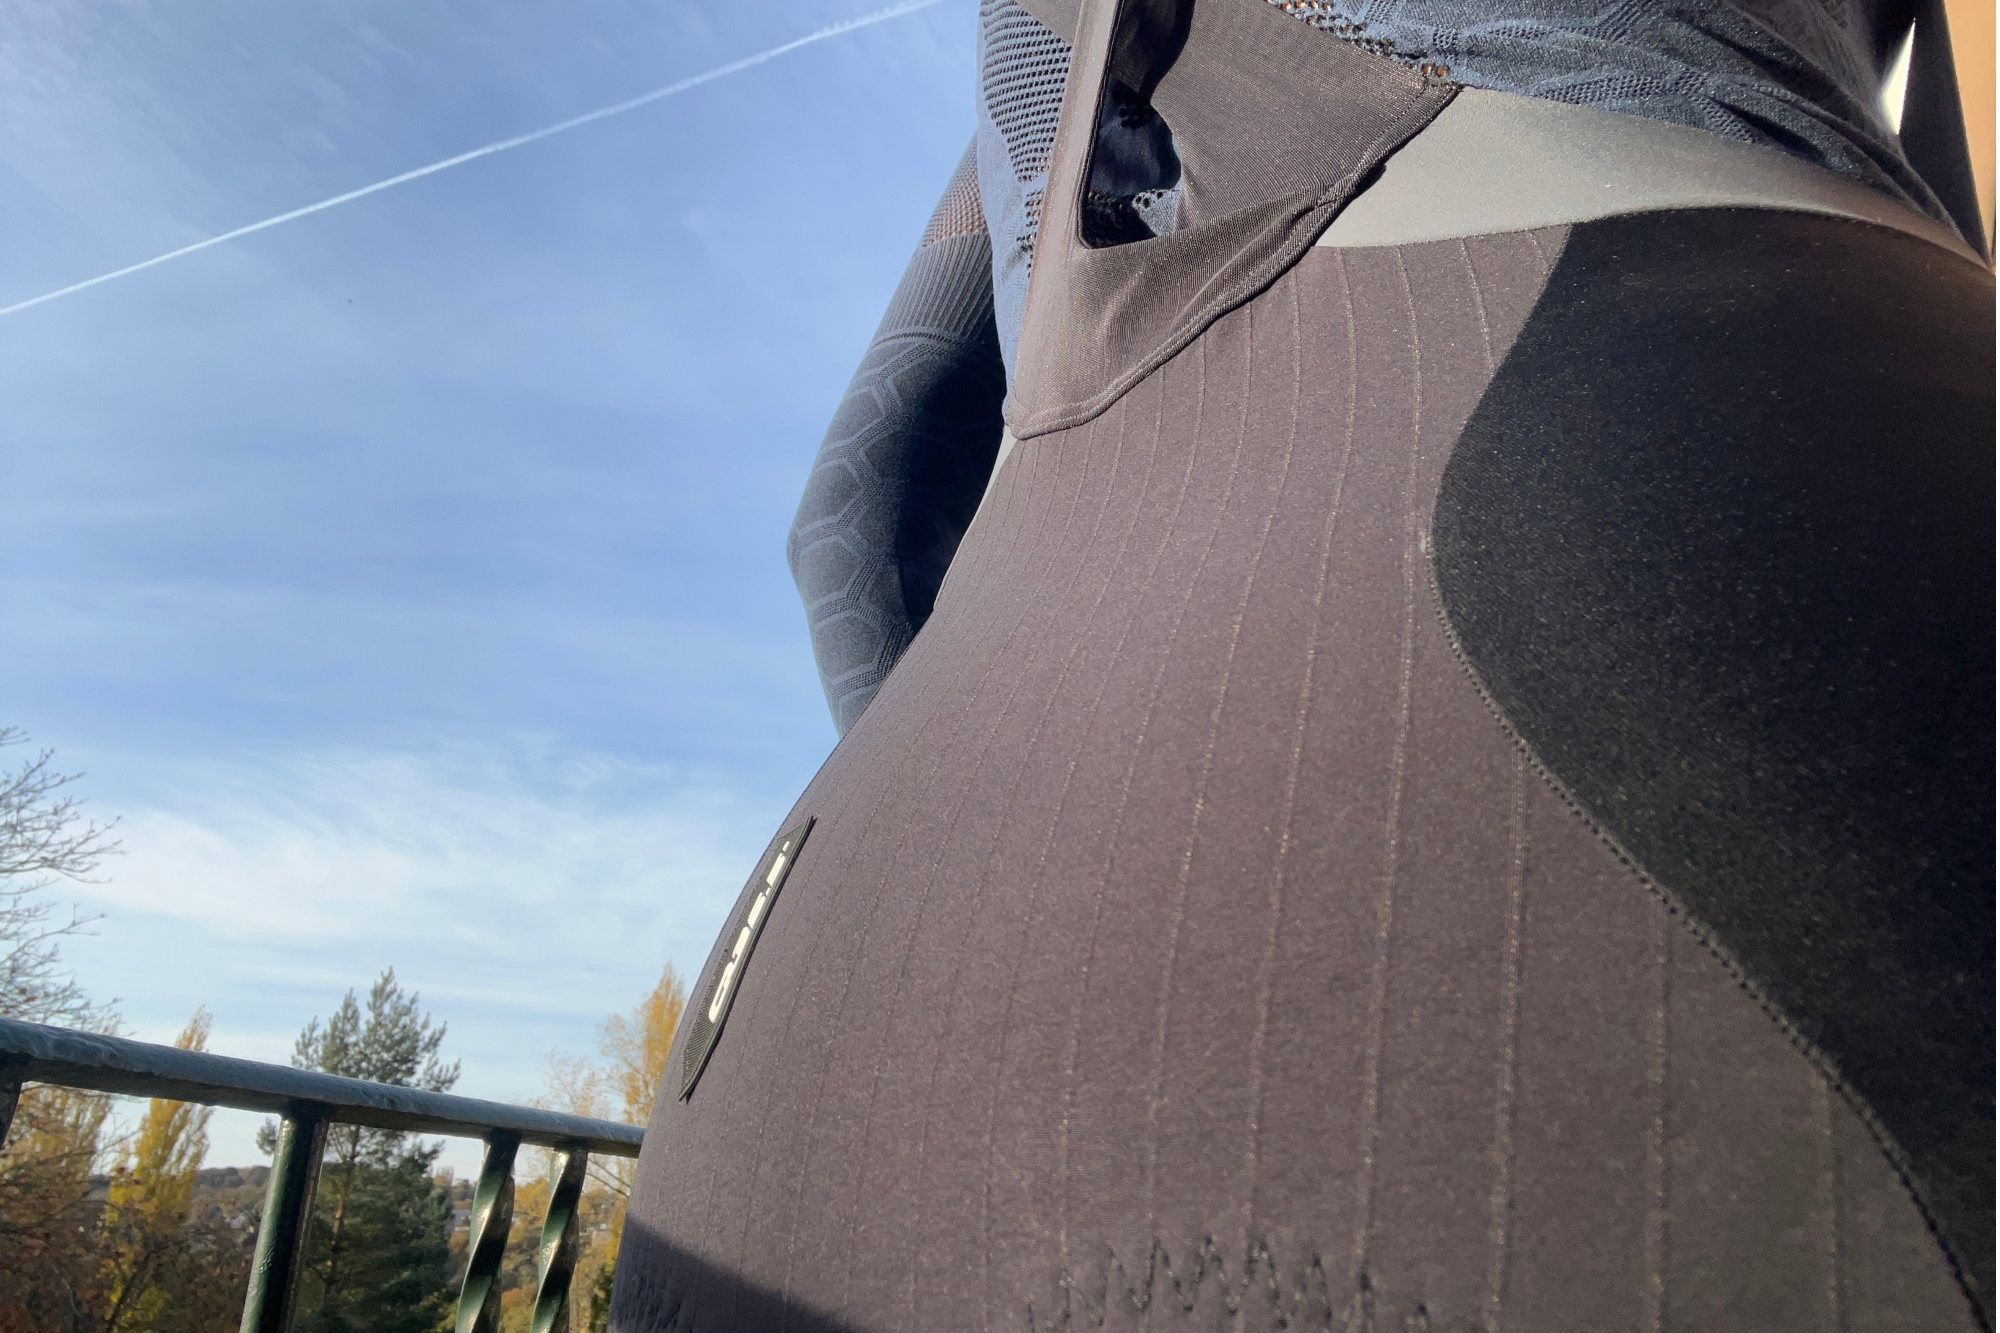 The Q36.5 Light bib tights shown close up of the fabric at the back of the tights, with blue sky to the left of the image.